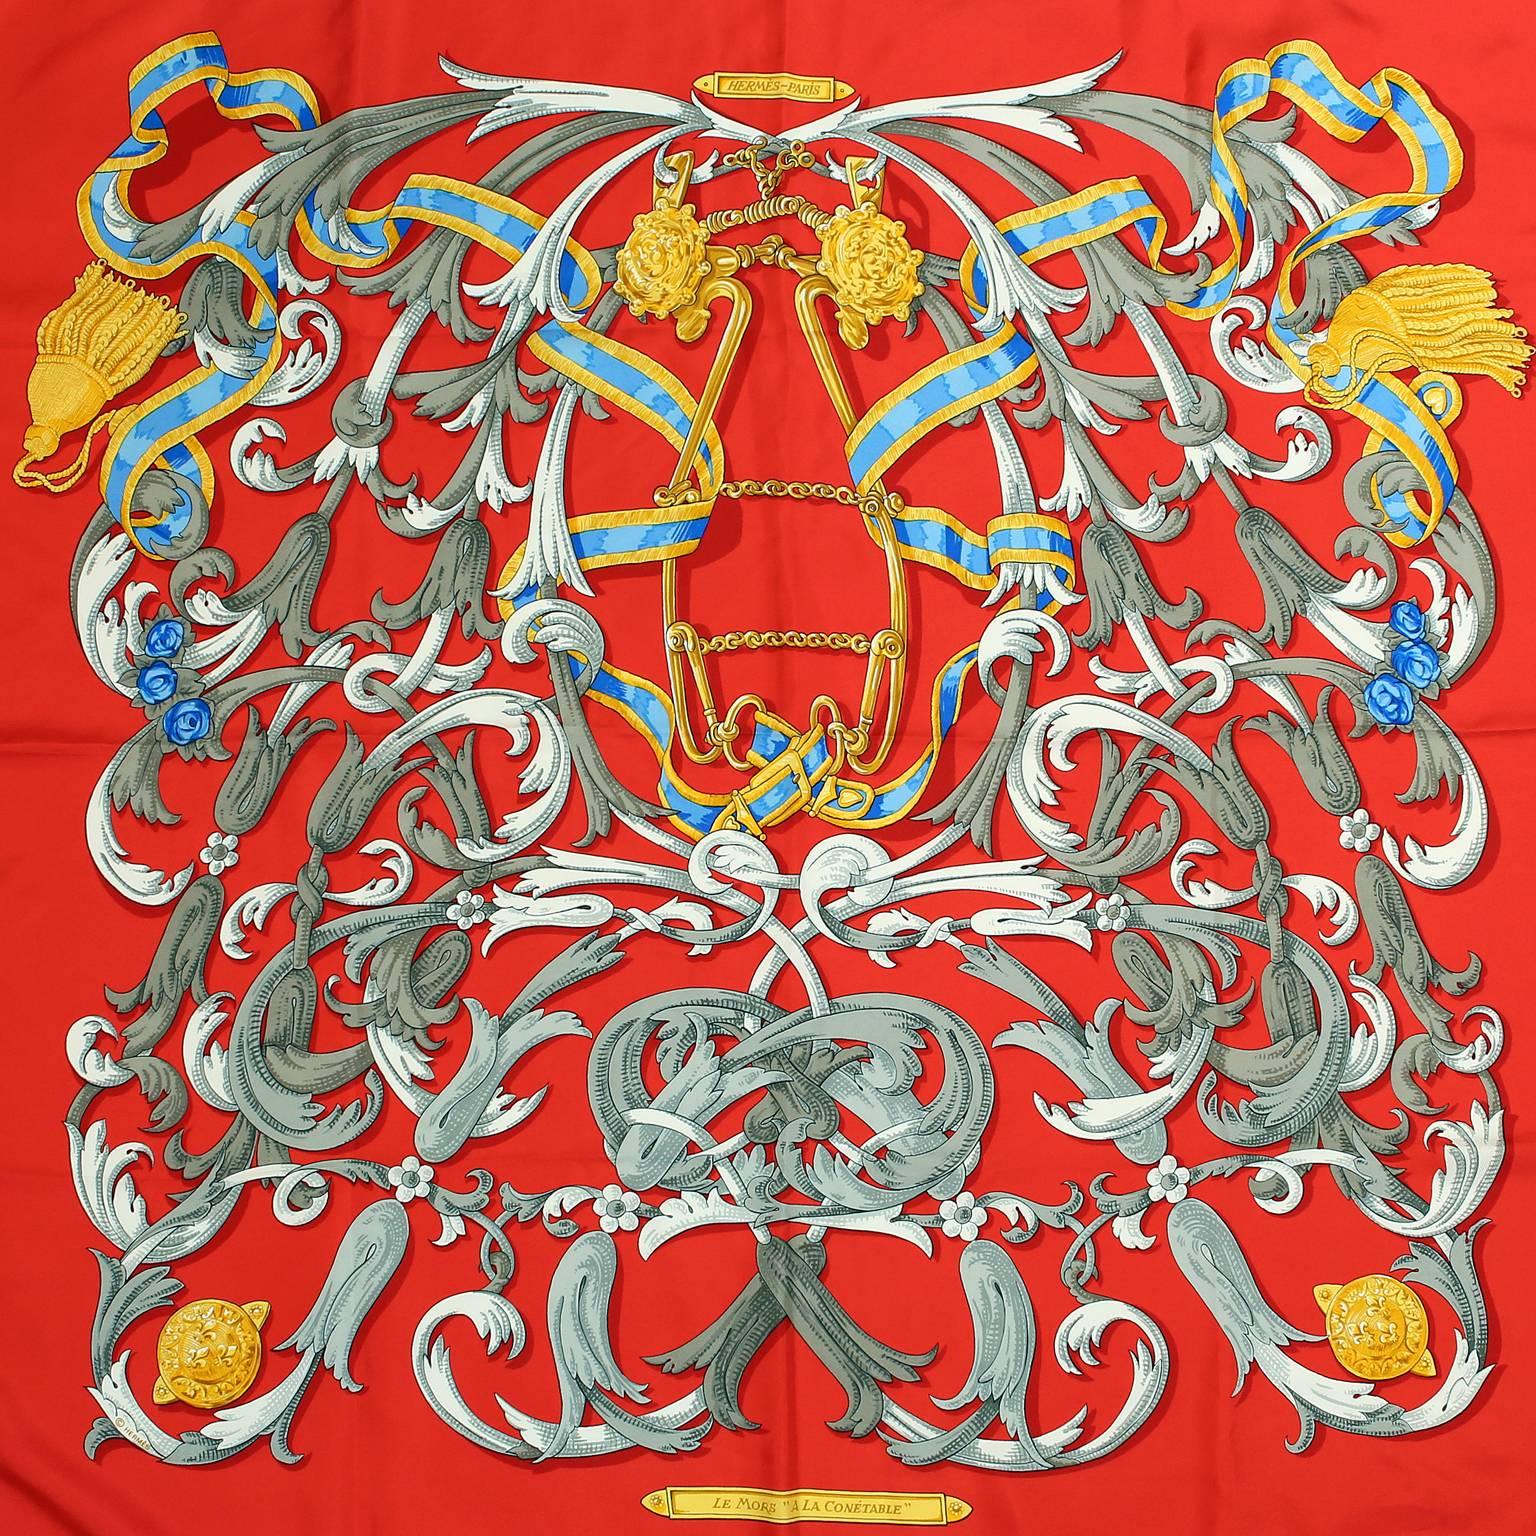 Hermès Red Le Mors a la Conetable 90 cm Silk Scarf -  Pristine
Originally designed by Henri d’Origny and released in 1970.  Equestrian themed design features a bright red background with swirling ribbons and tassels.  A gold toned halter and bit are